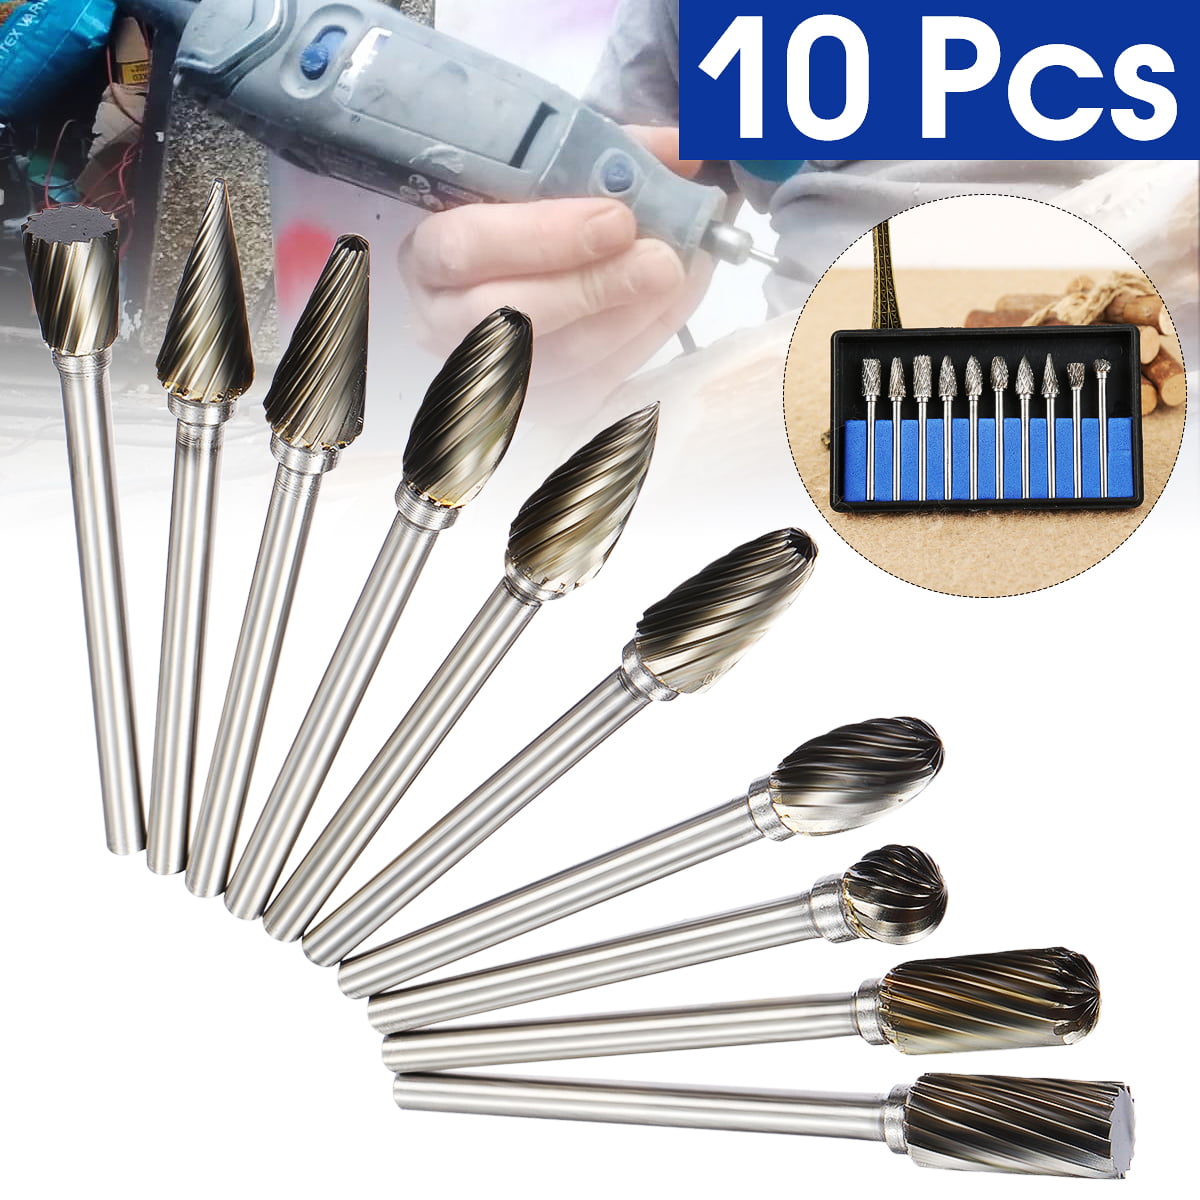 10X Tungsten 6mm Head Carbide Burr Drill Kit For Grinder Carving Bit Rotary Tool 